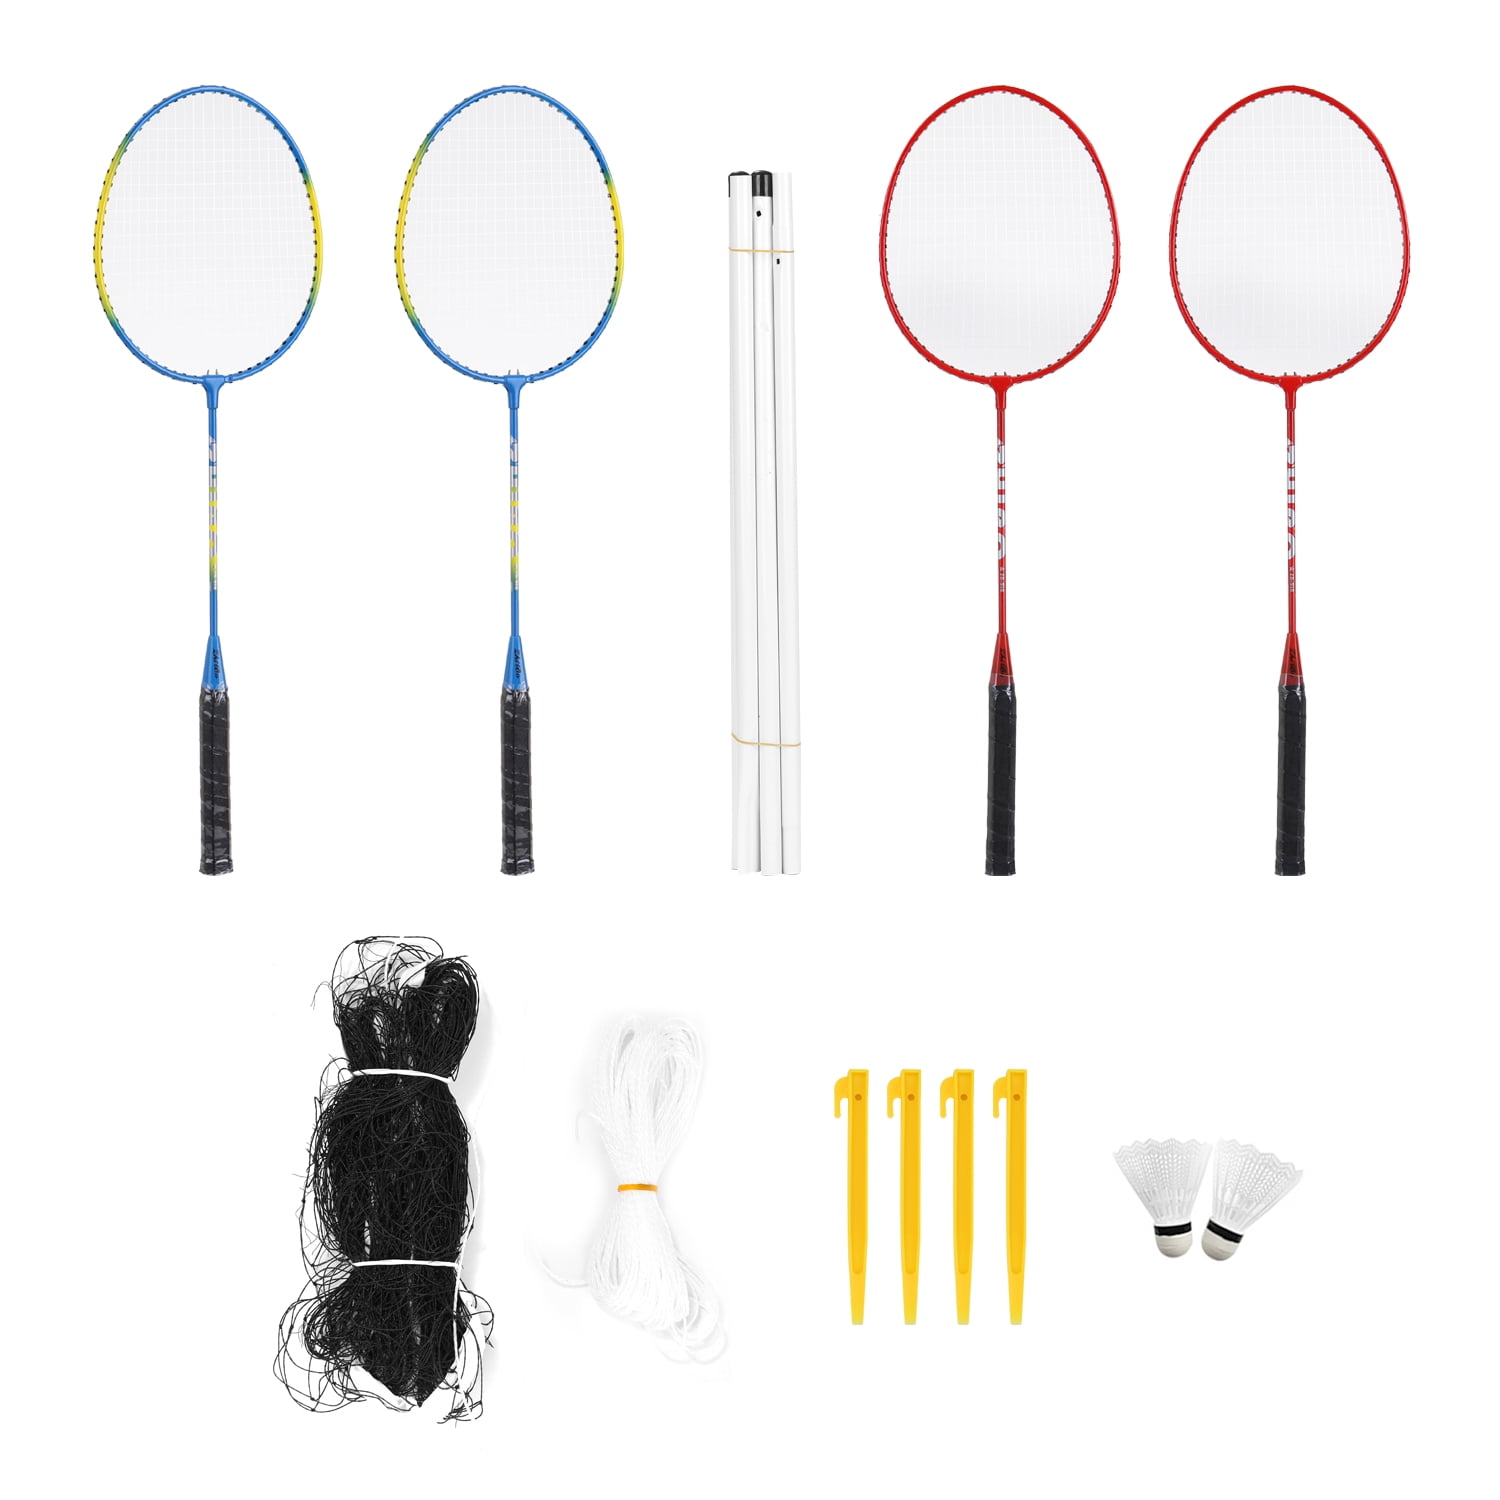 Details about    Badminton Rackets Set of 4 for Outdoor Backyard Games Including 4 Rackets, 